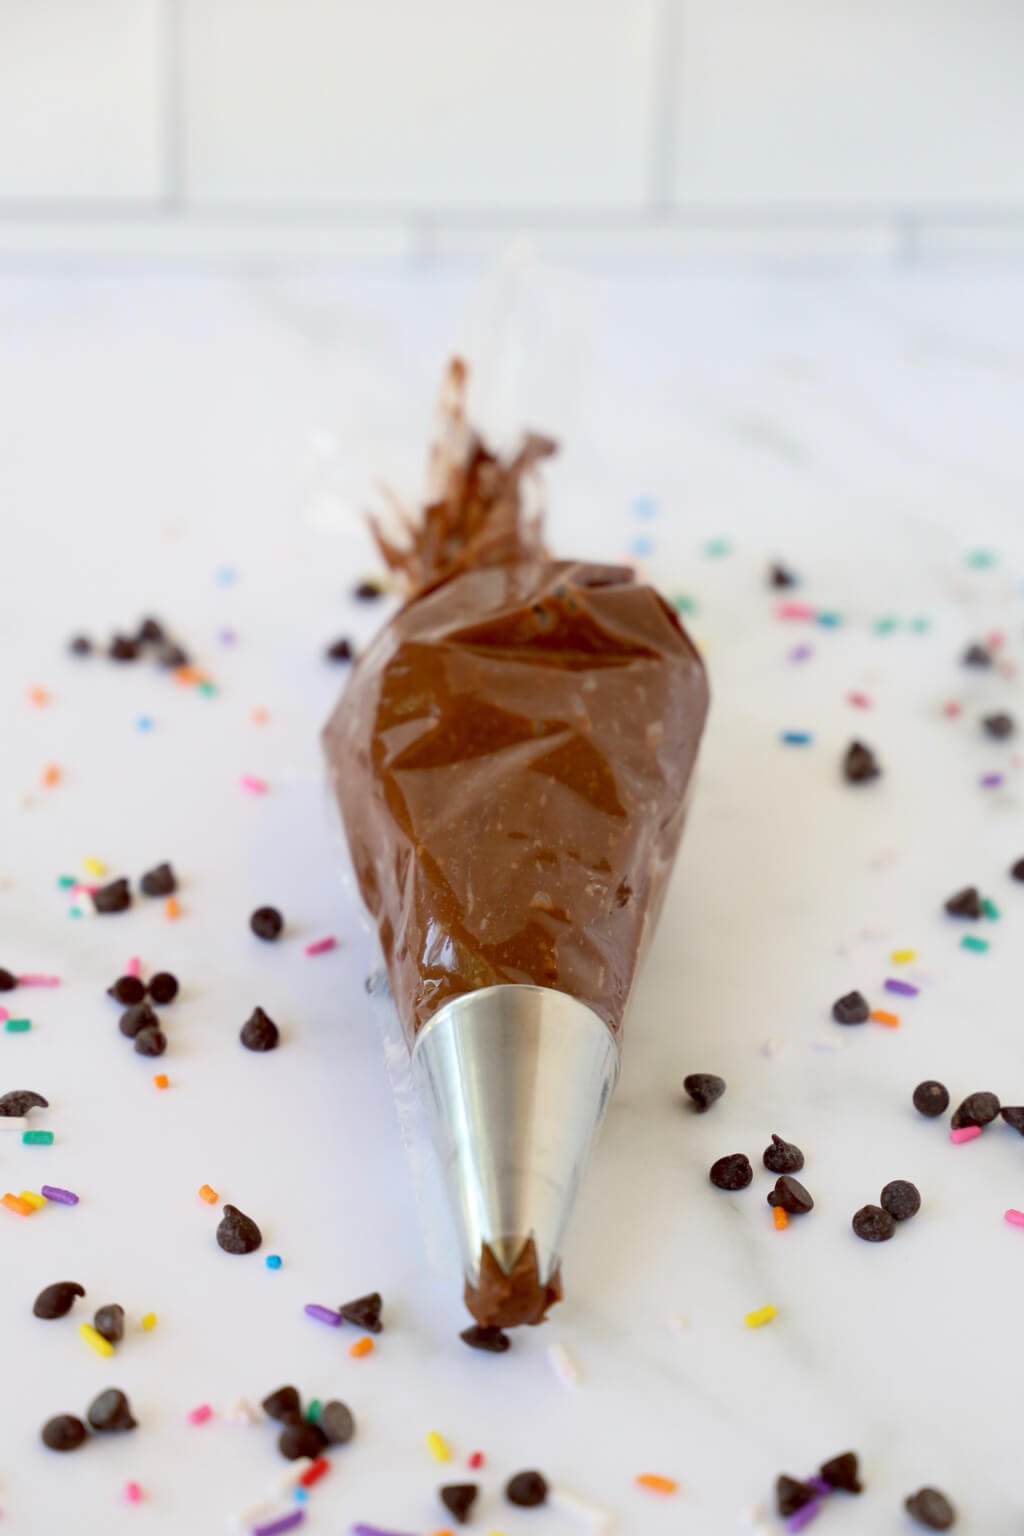 A piping bag filled with chocolate buttercream frosting, surrounded by chocolate chips and rainbow sprinkles